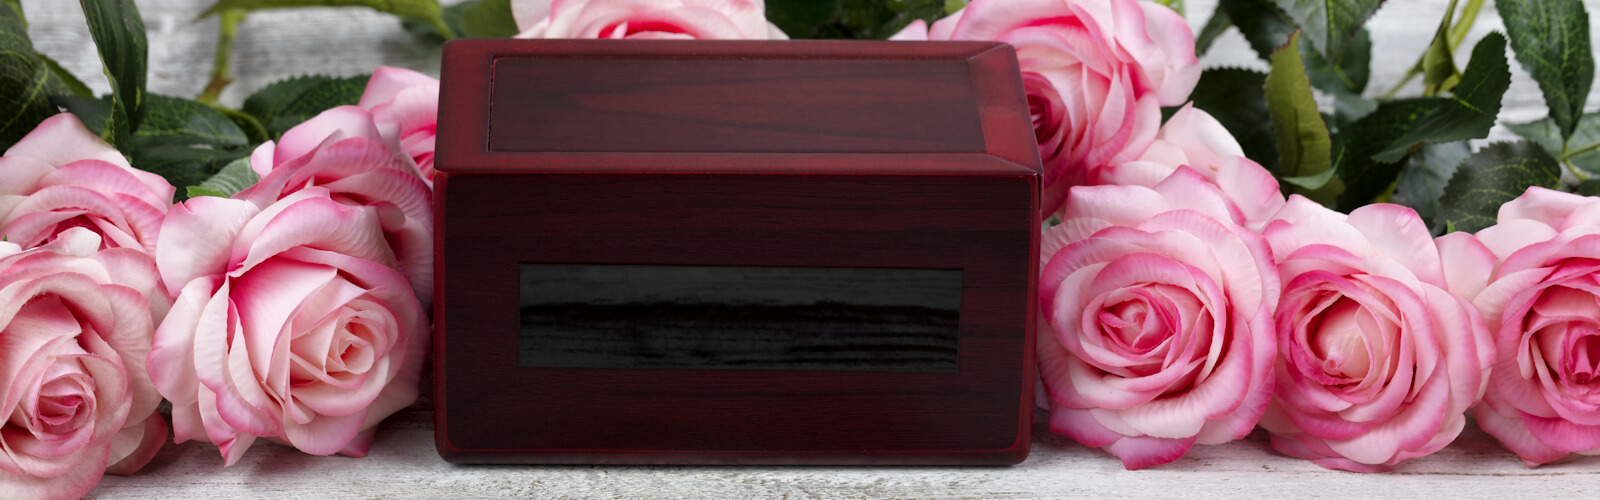 Close up of a cremation funeral box with rose flowers for death concept